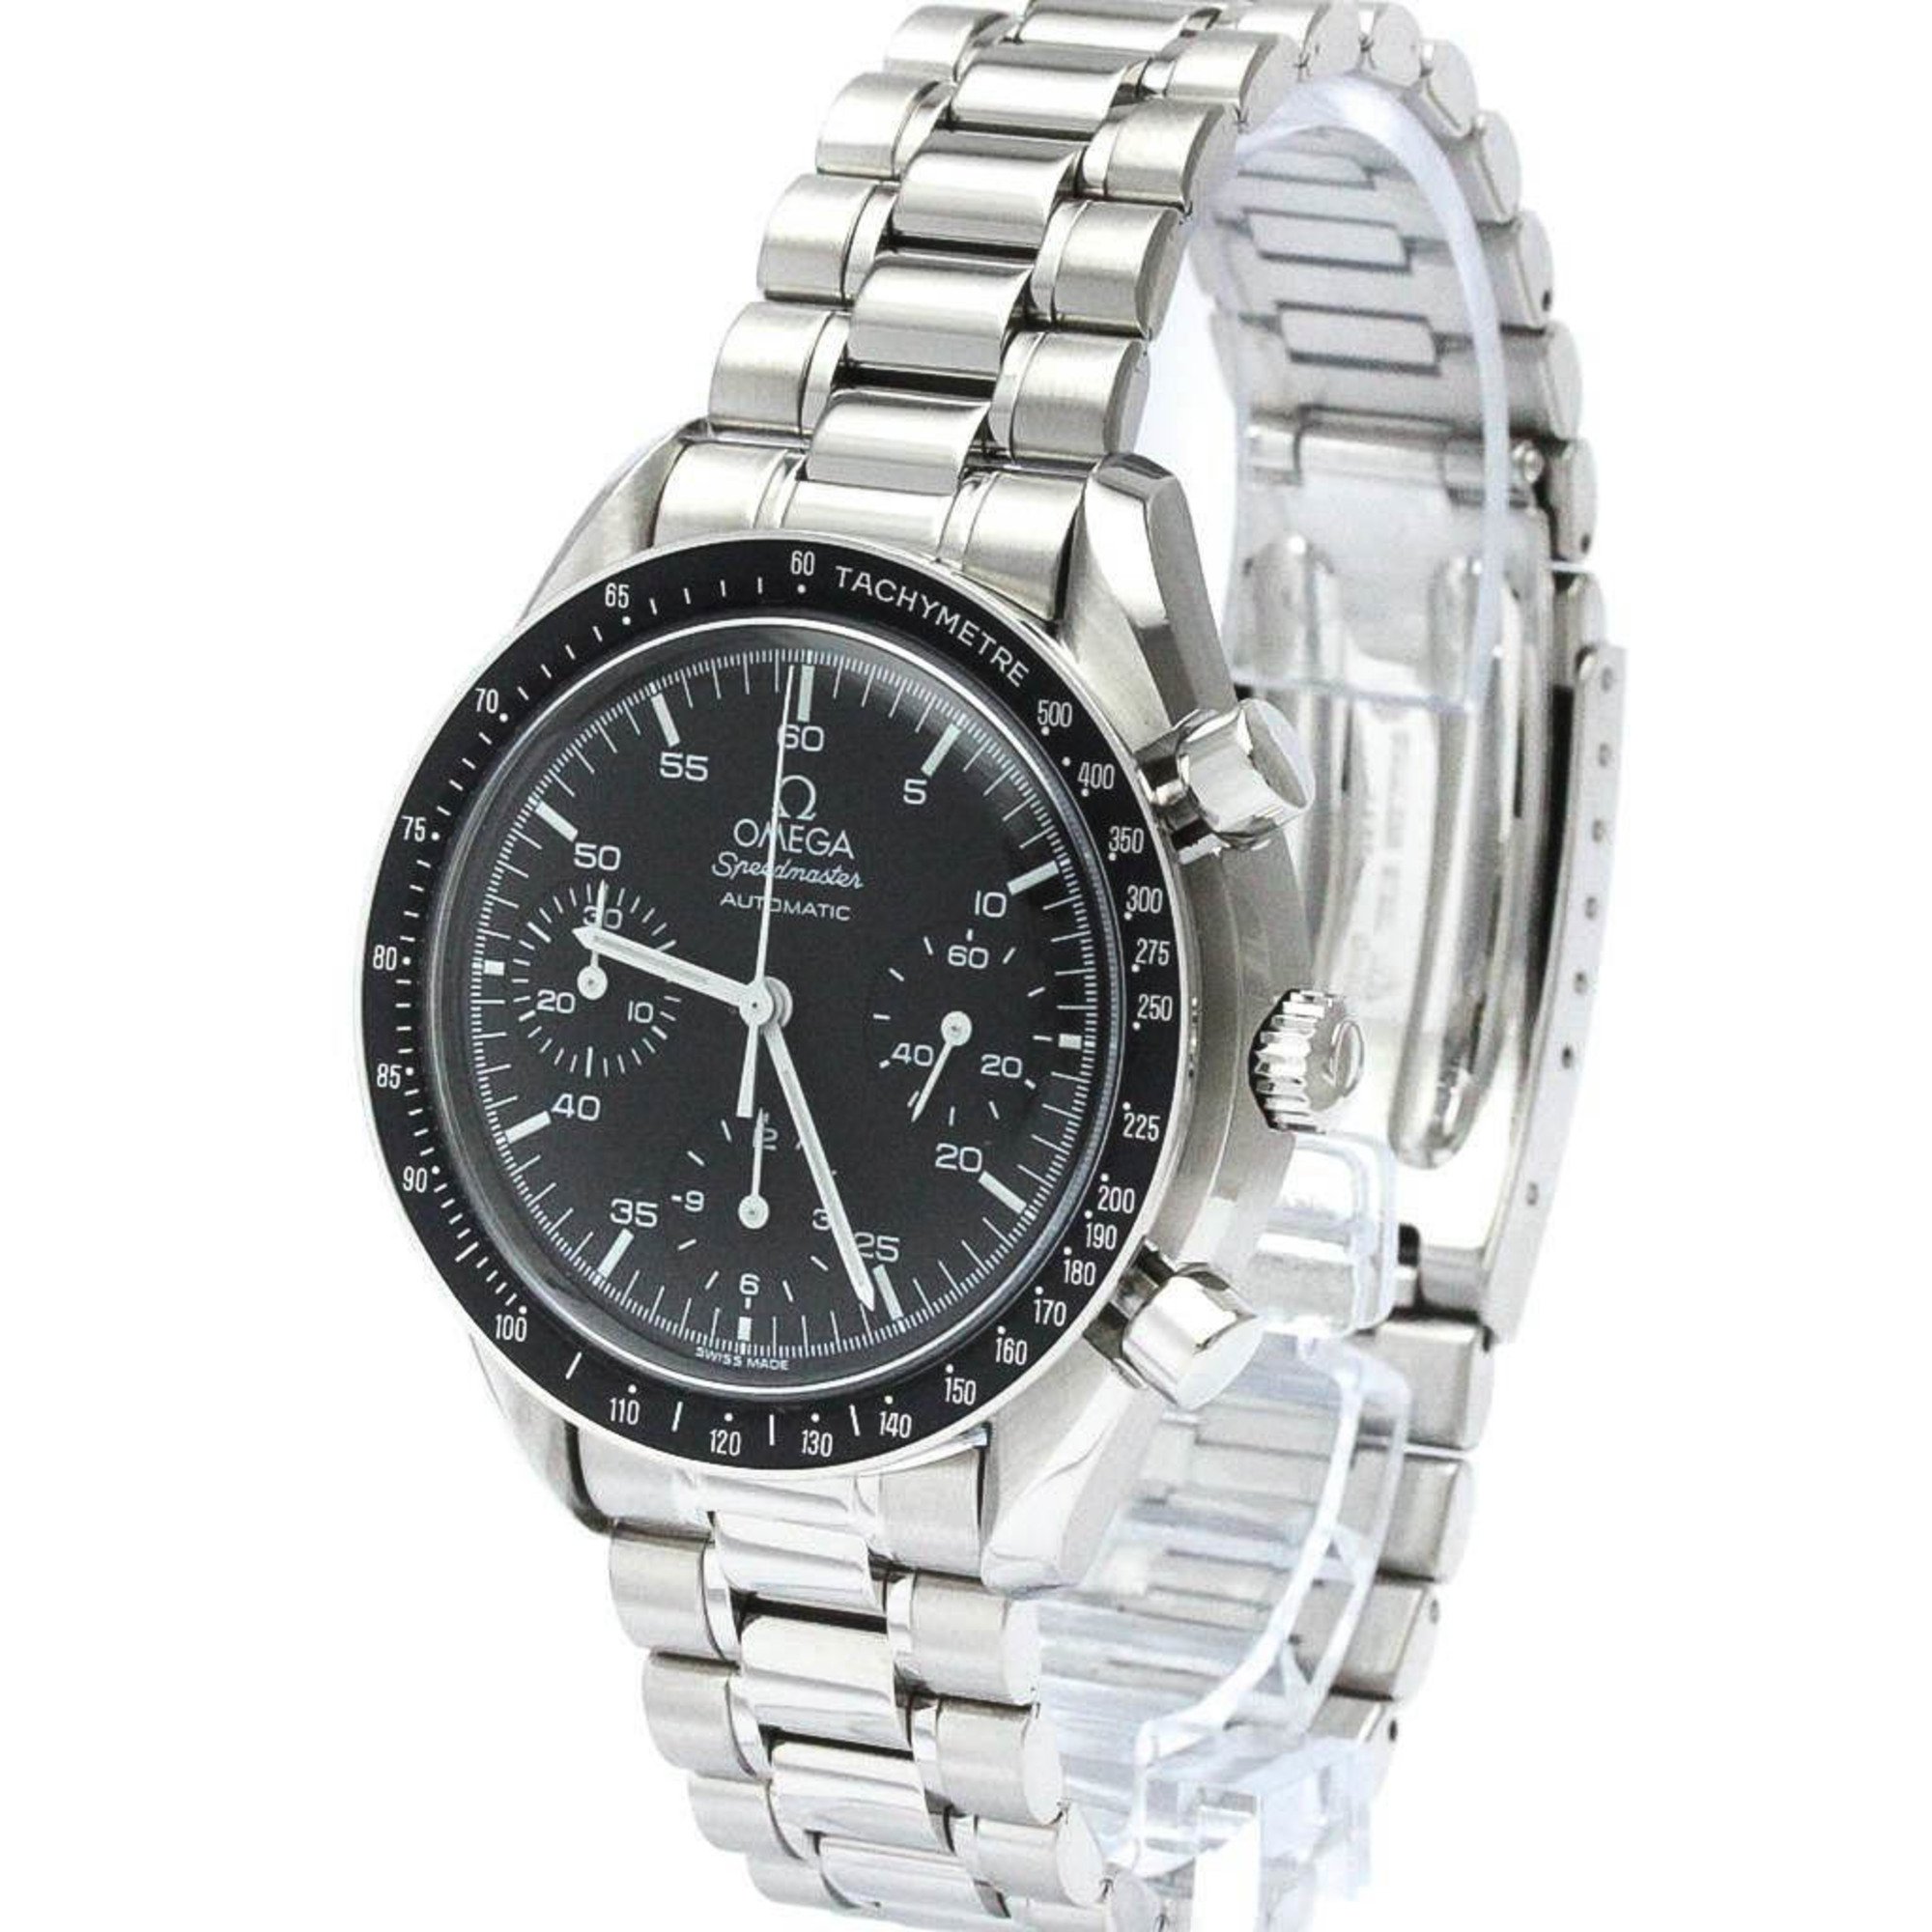 Polished OMEGA Speedmaster Automatic Steel Mens Watch 3510.50 BF567478